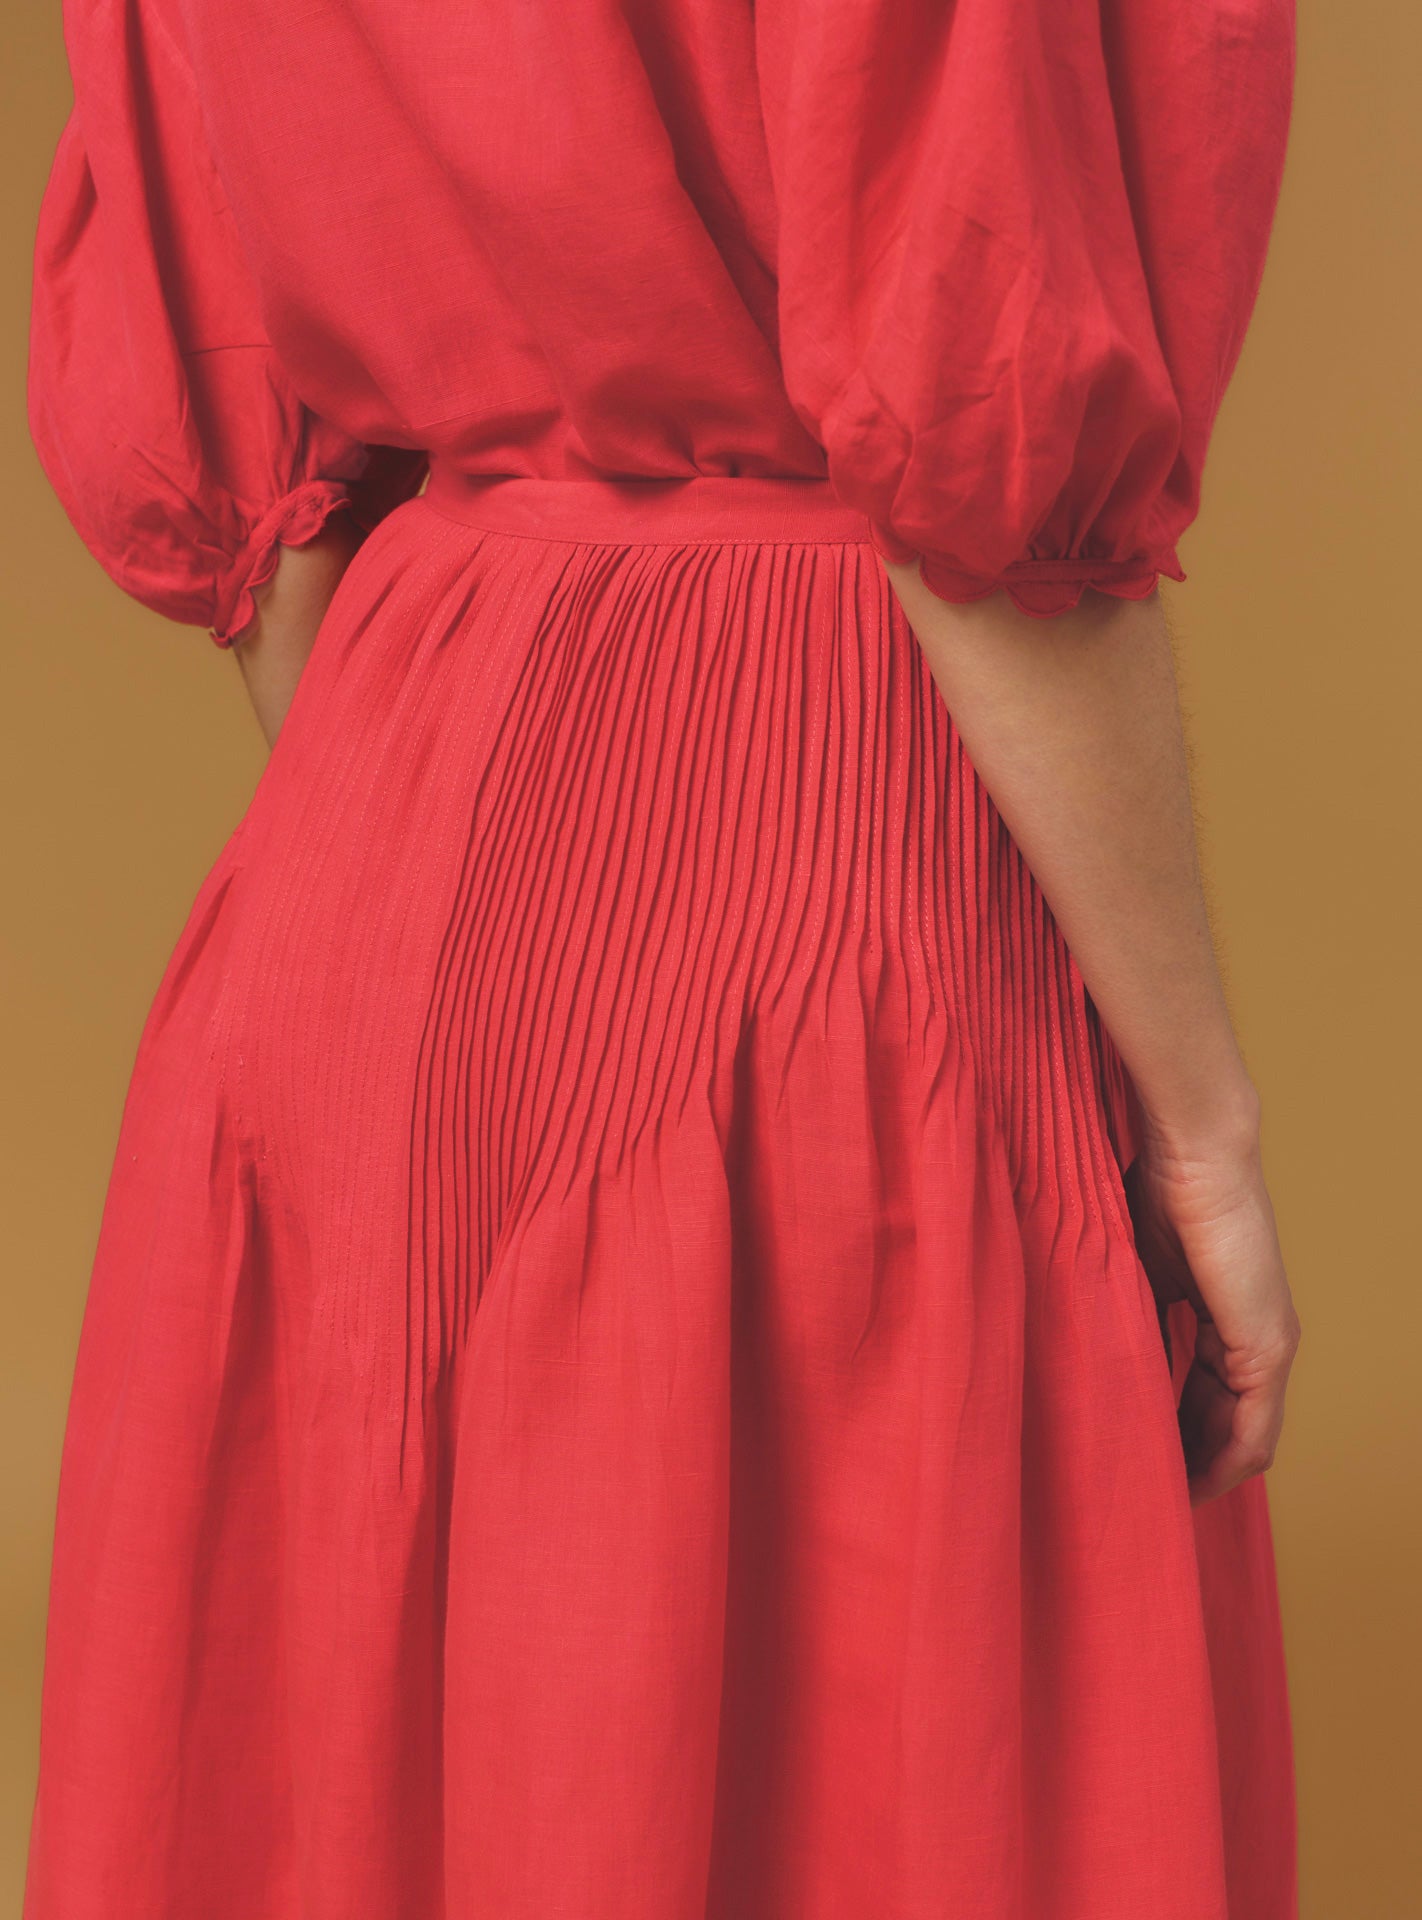 Detail Back view of Verde Barocco Scallops Raspberry Skirt by Thierry Colson